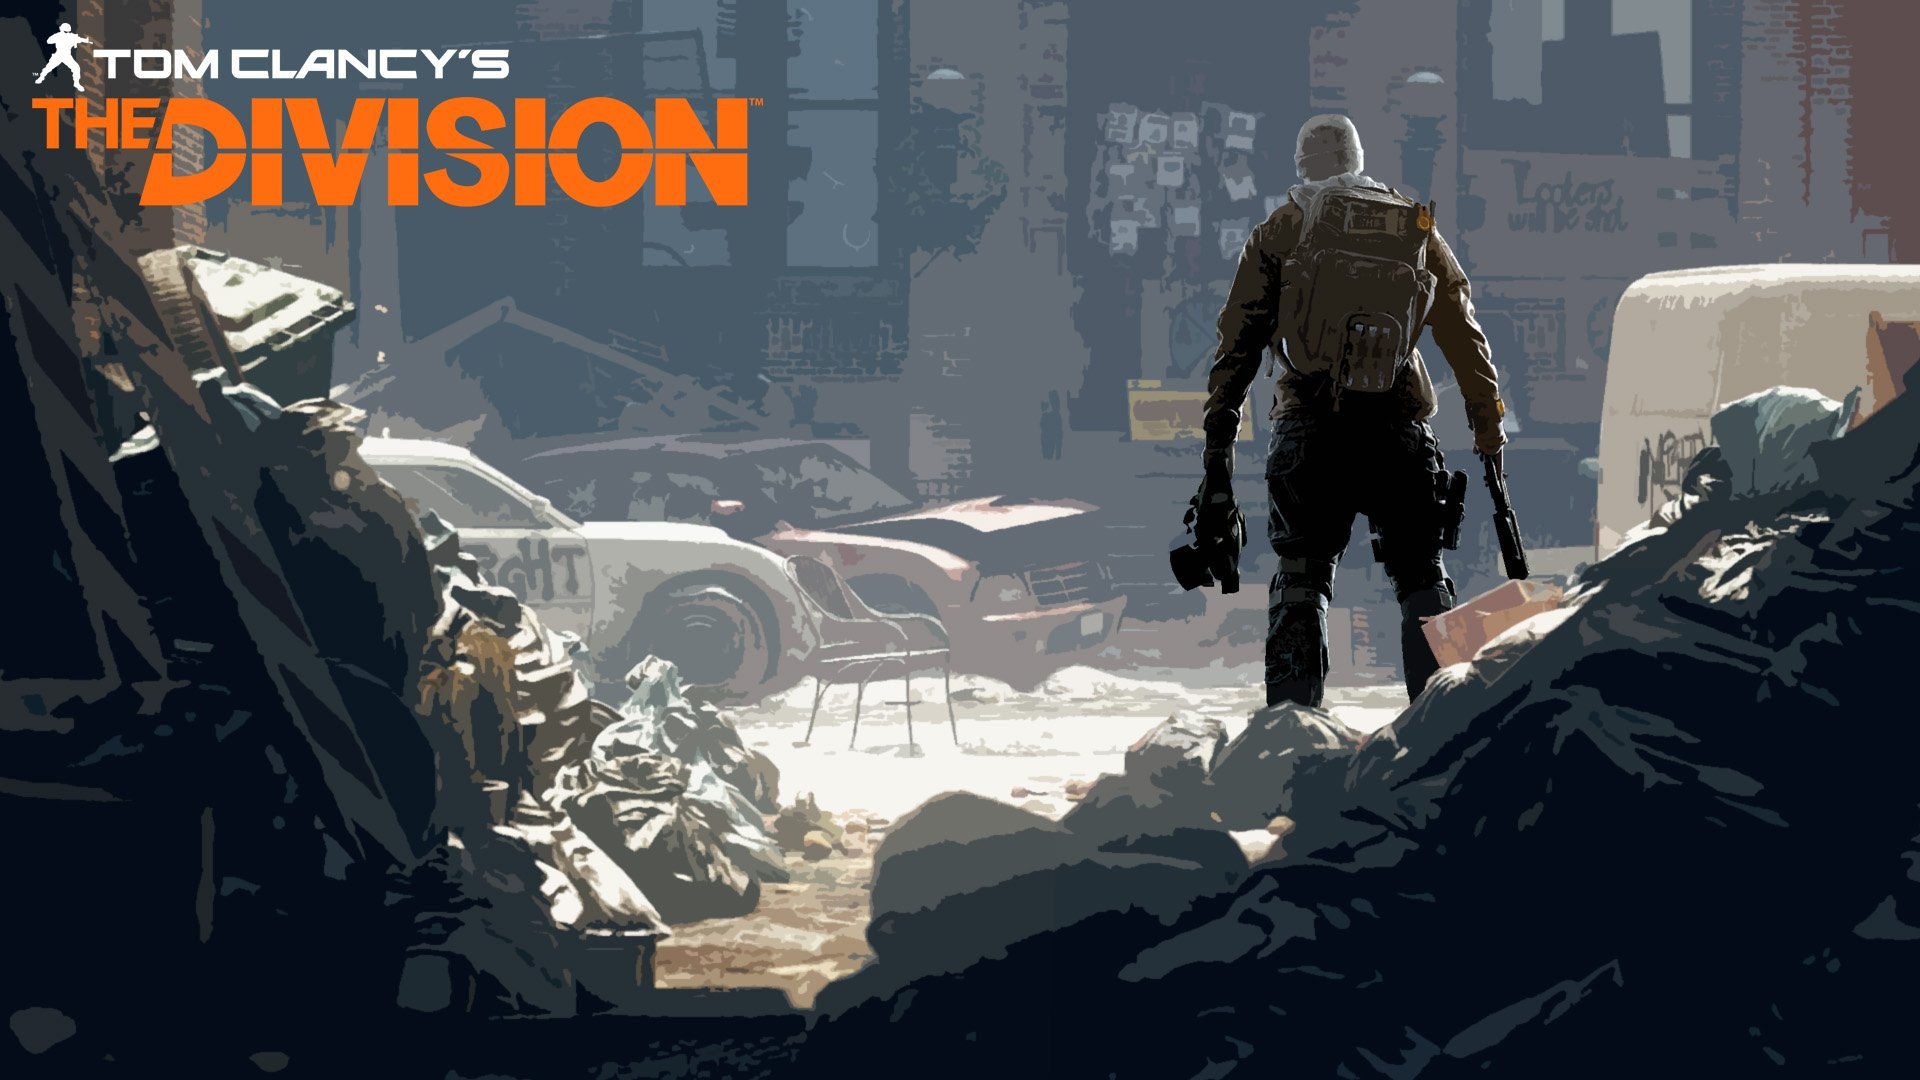 Moto X Video Game / Tom Clancys The Division Wallpaper ID 19201080 Tom